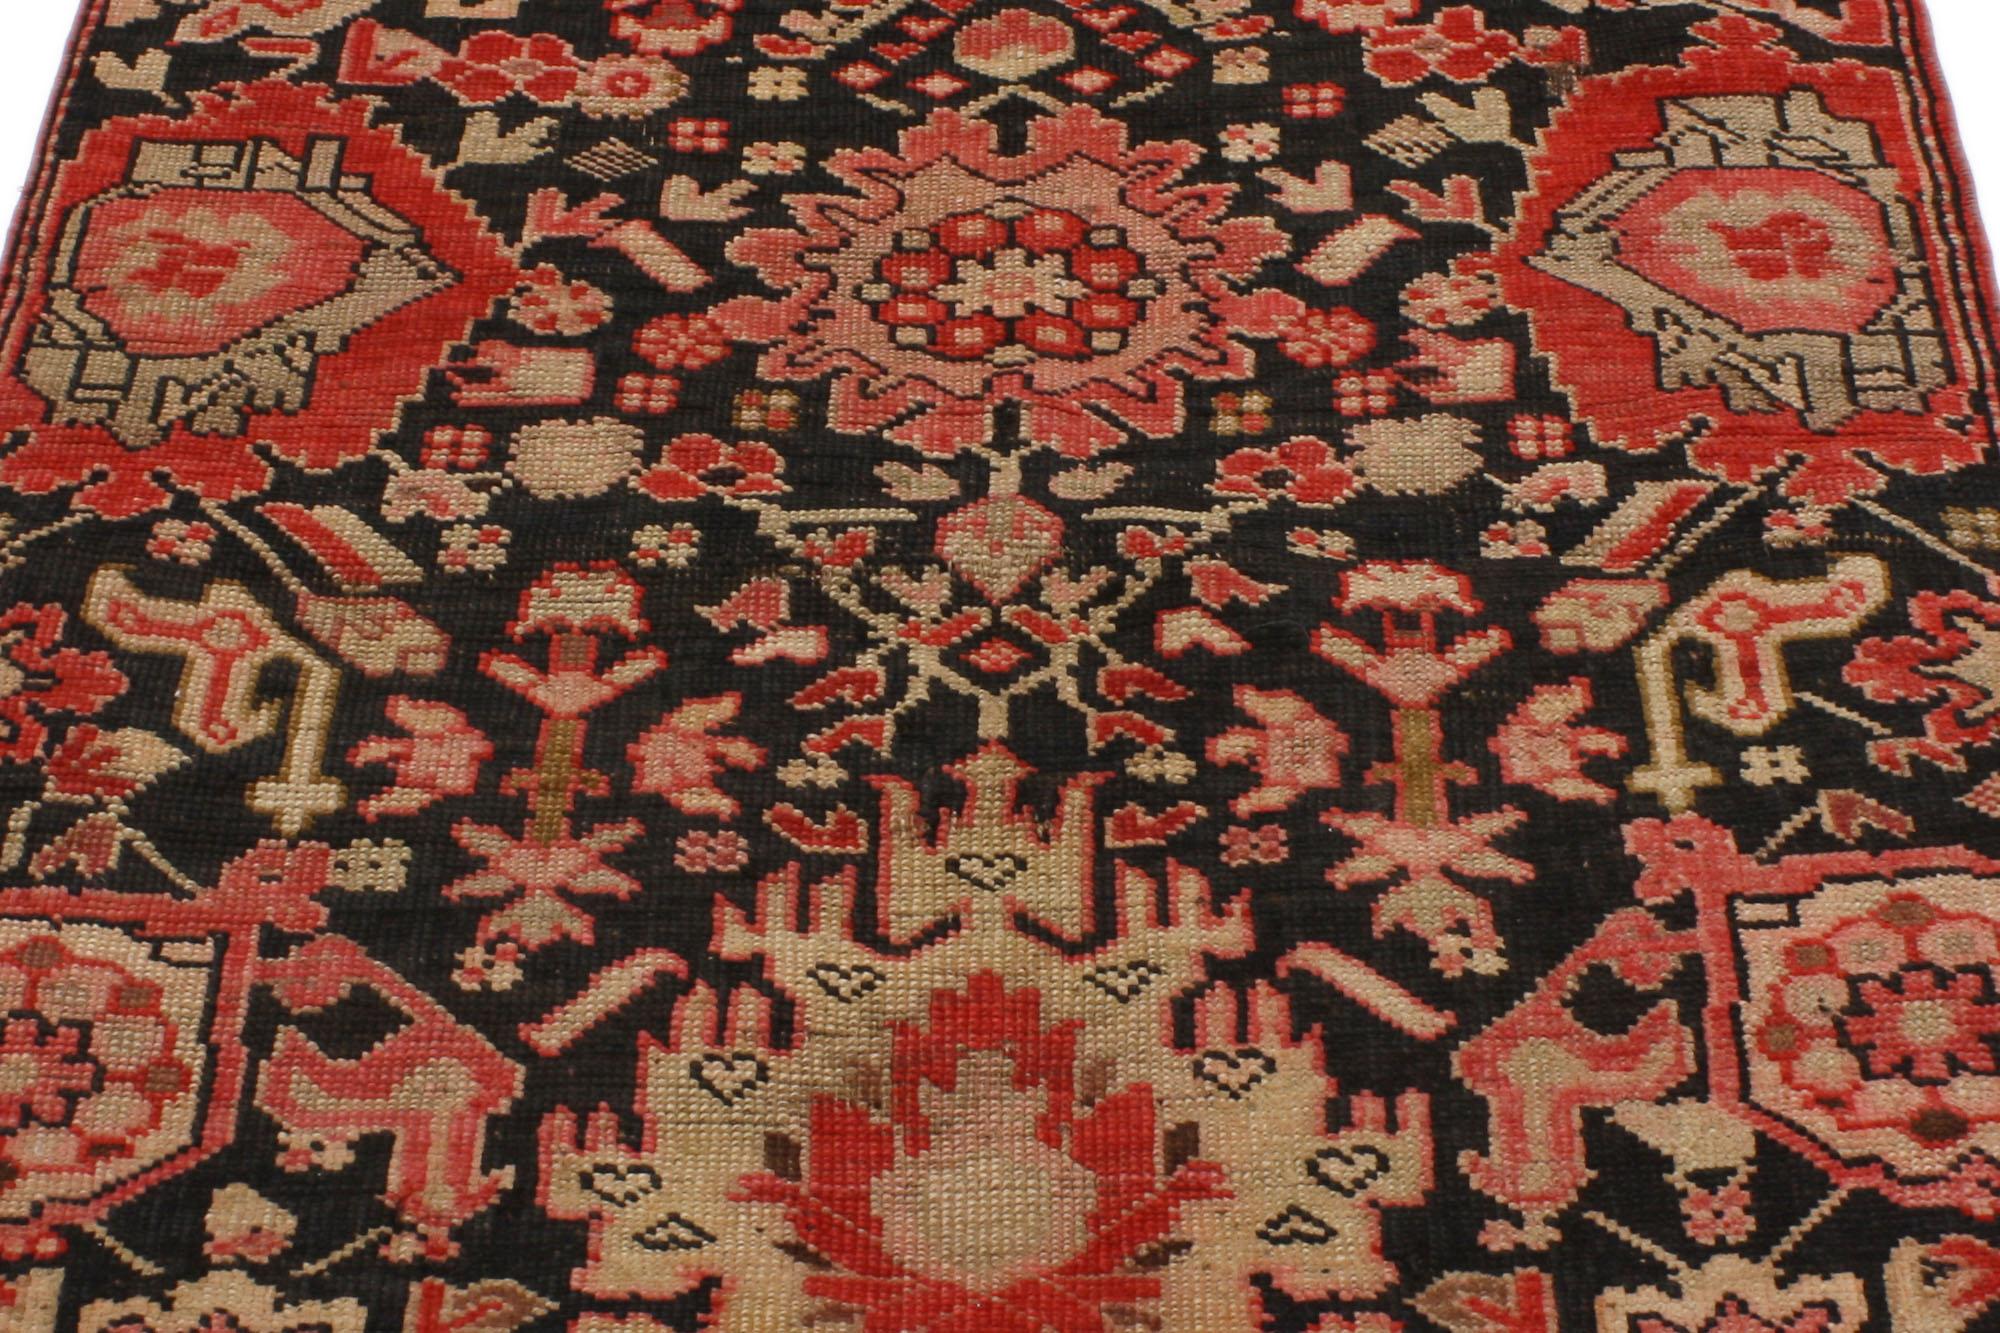 Vintage Turkish Oushak Rug, Maximalist Style Meets Traditional Sensibility In Good Condition For Sale In Dallas, TX